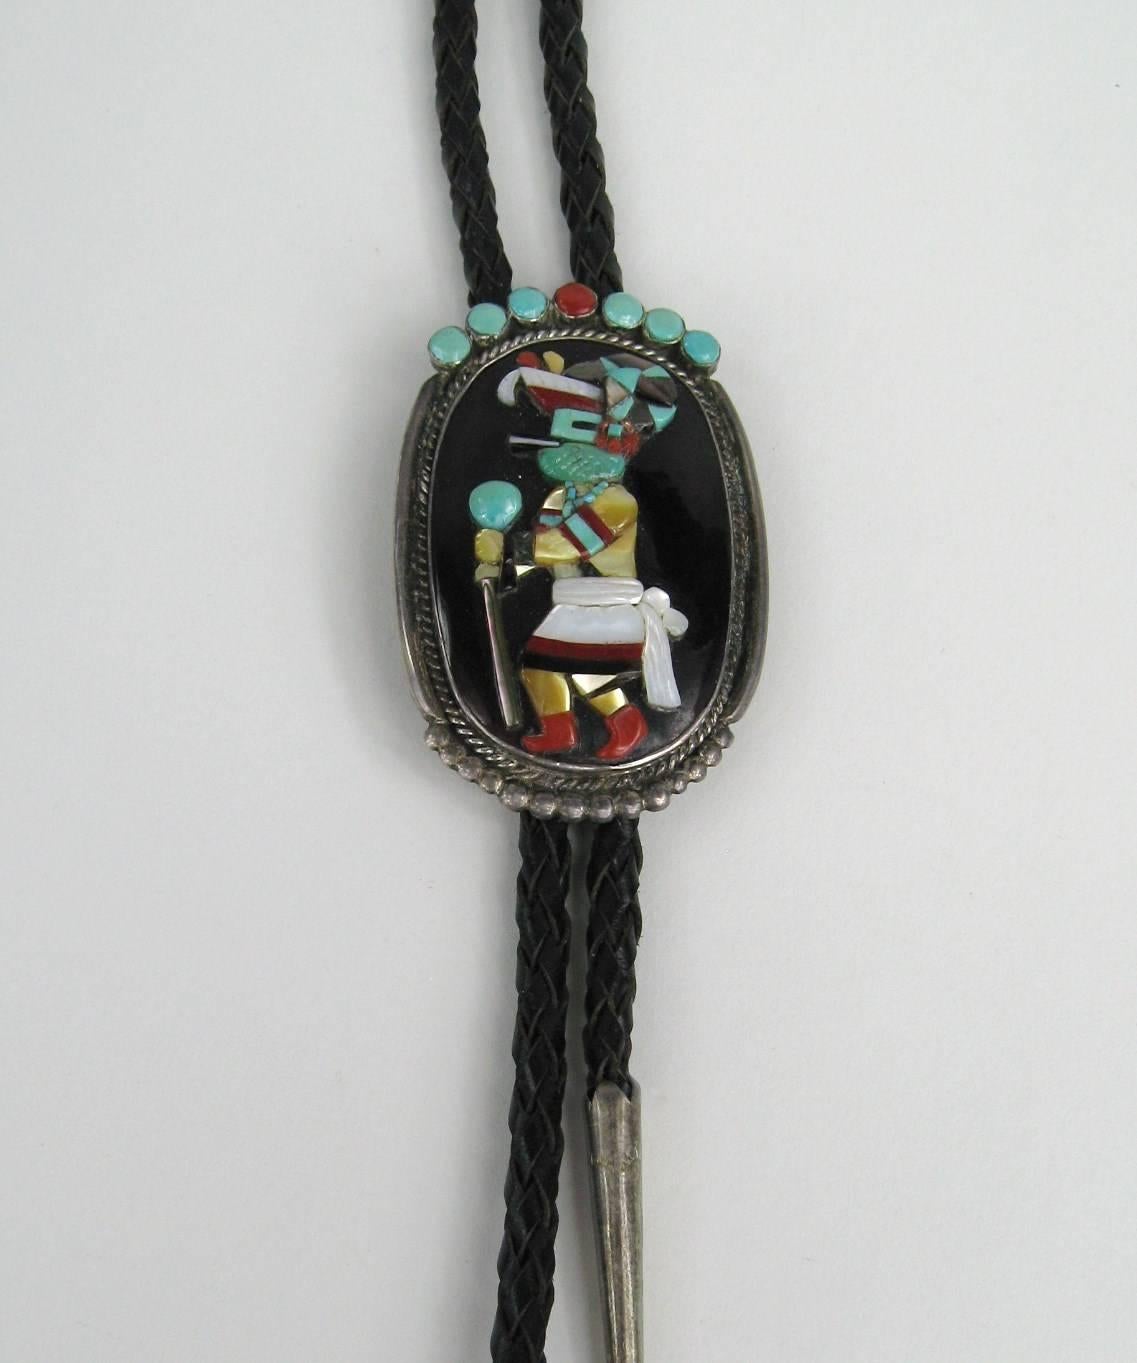 Stunning Workmanship on this Bennett Bolo with a Variety of stones such as Turquoise Coral Mother of pearl Abalone.  measures 2.50 in Top to bottom x 1.65 in. The Leather braid measuring 38 inches long. This is out of a massive collection of Hopi,